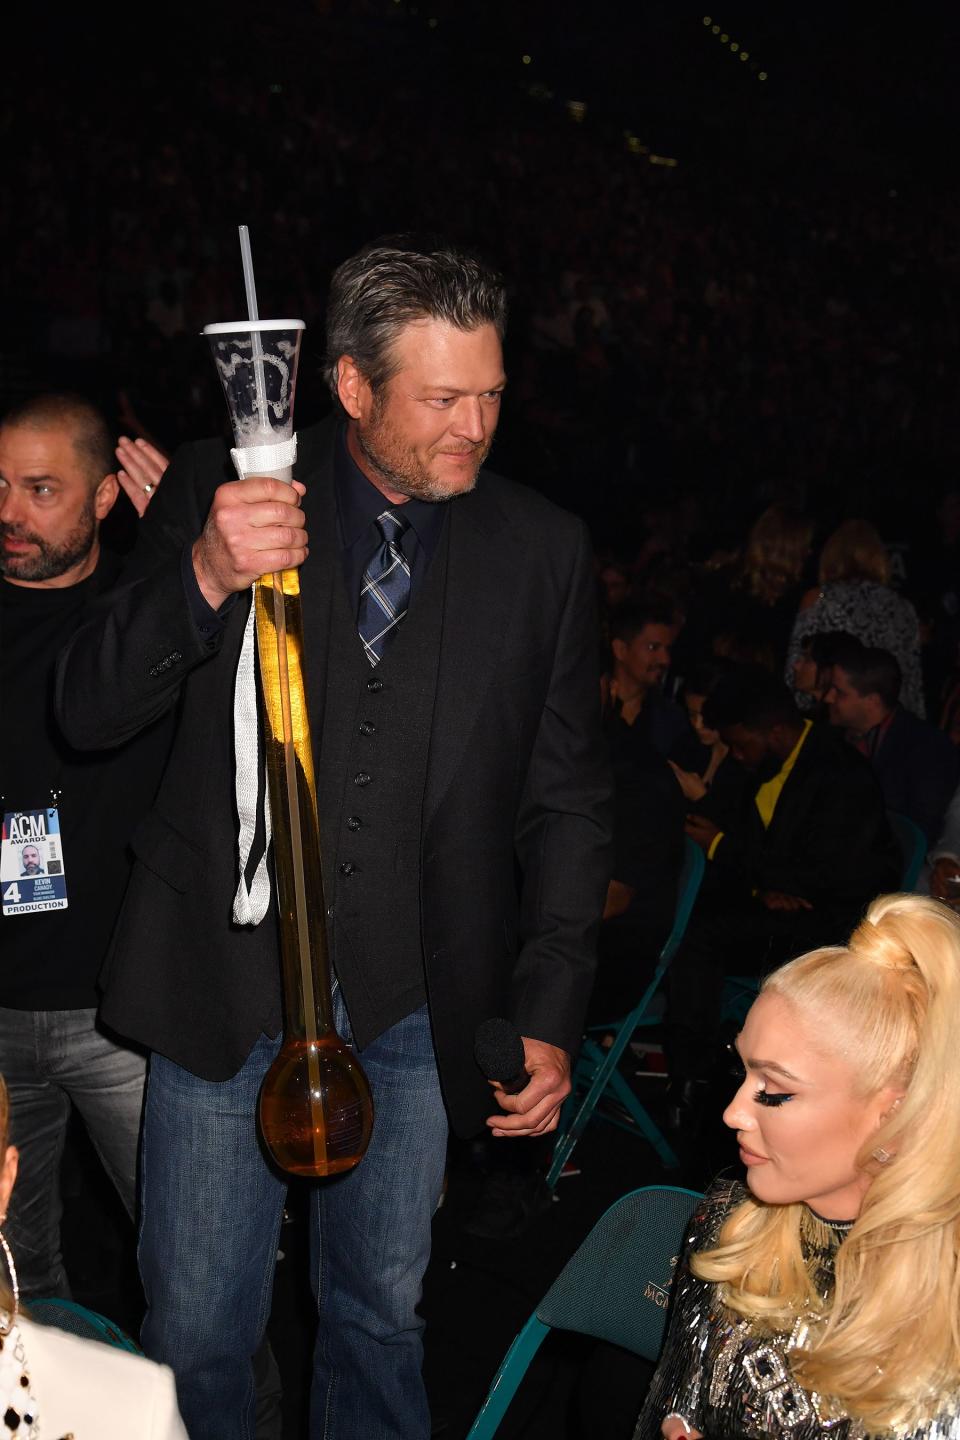 Blake Shelton Brought All the Beer